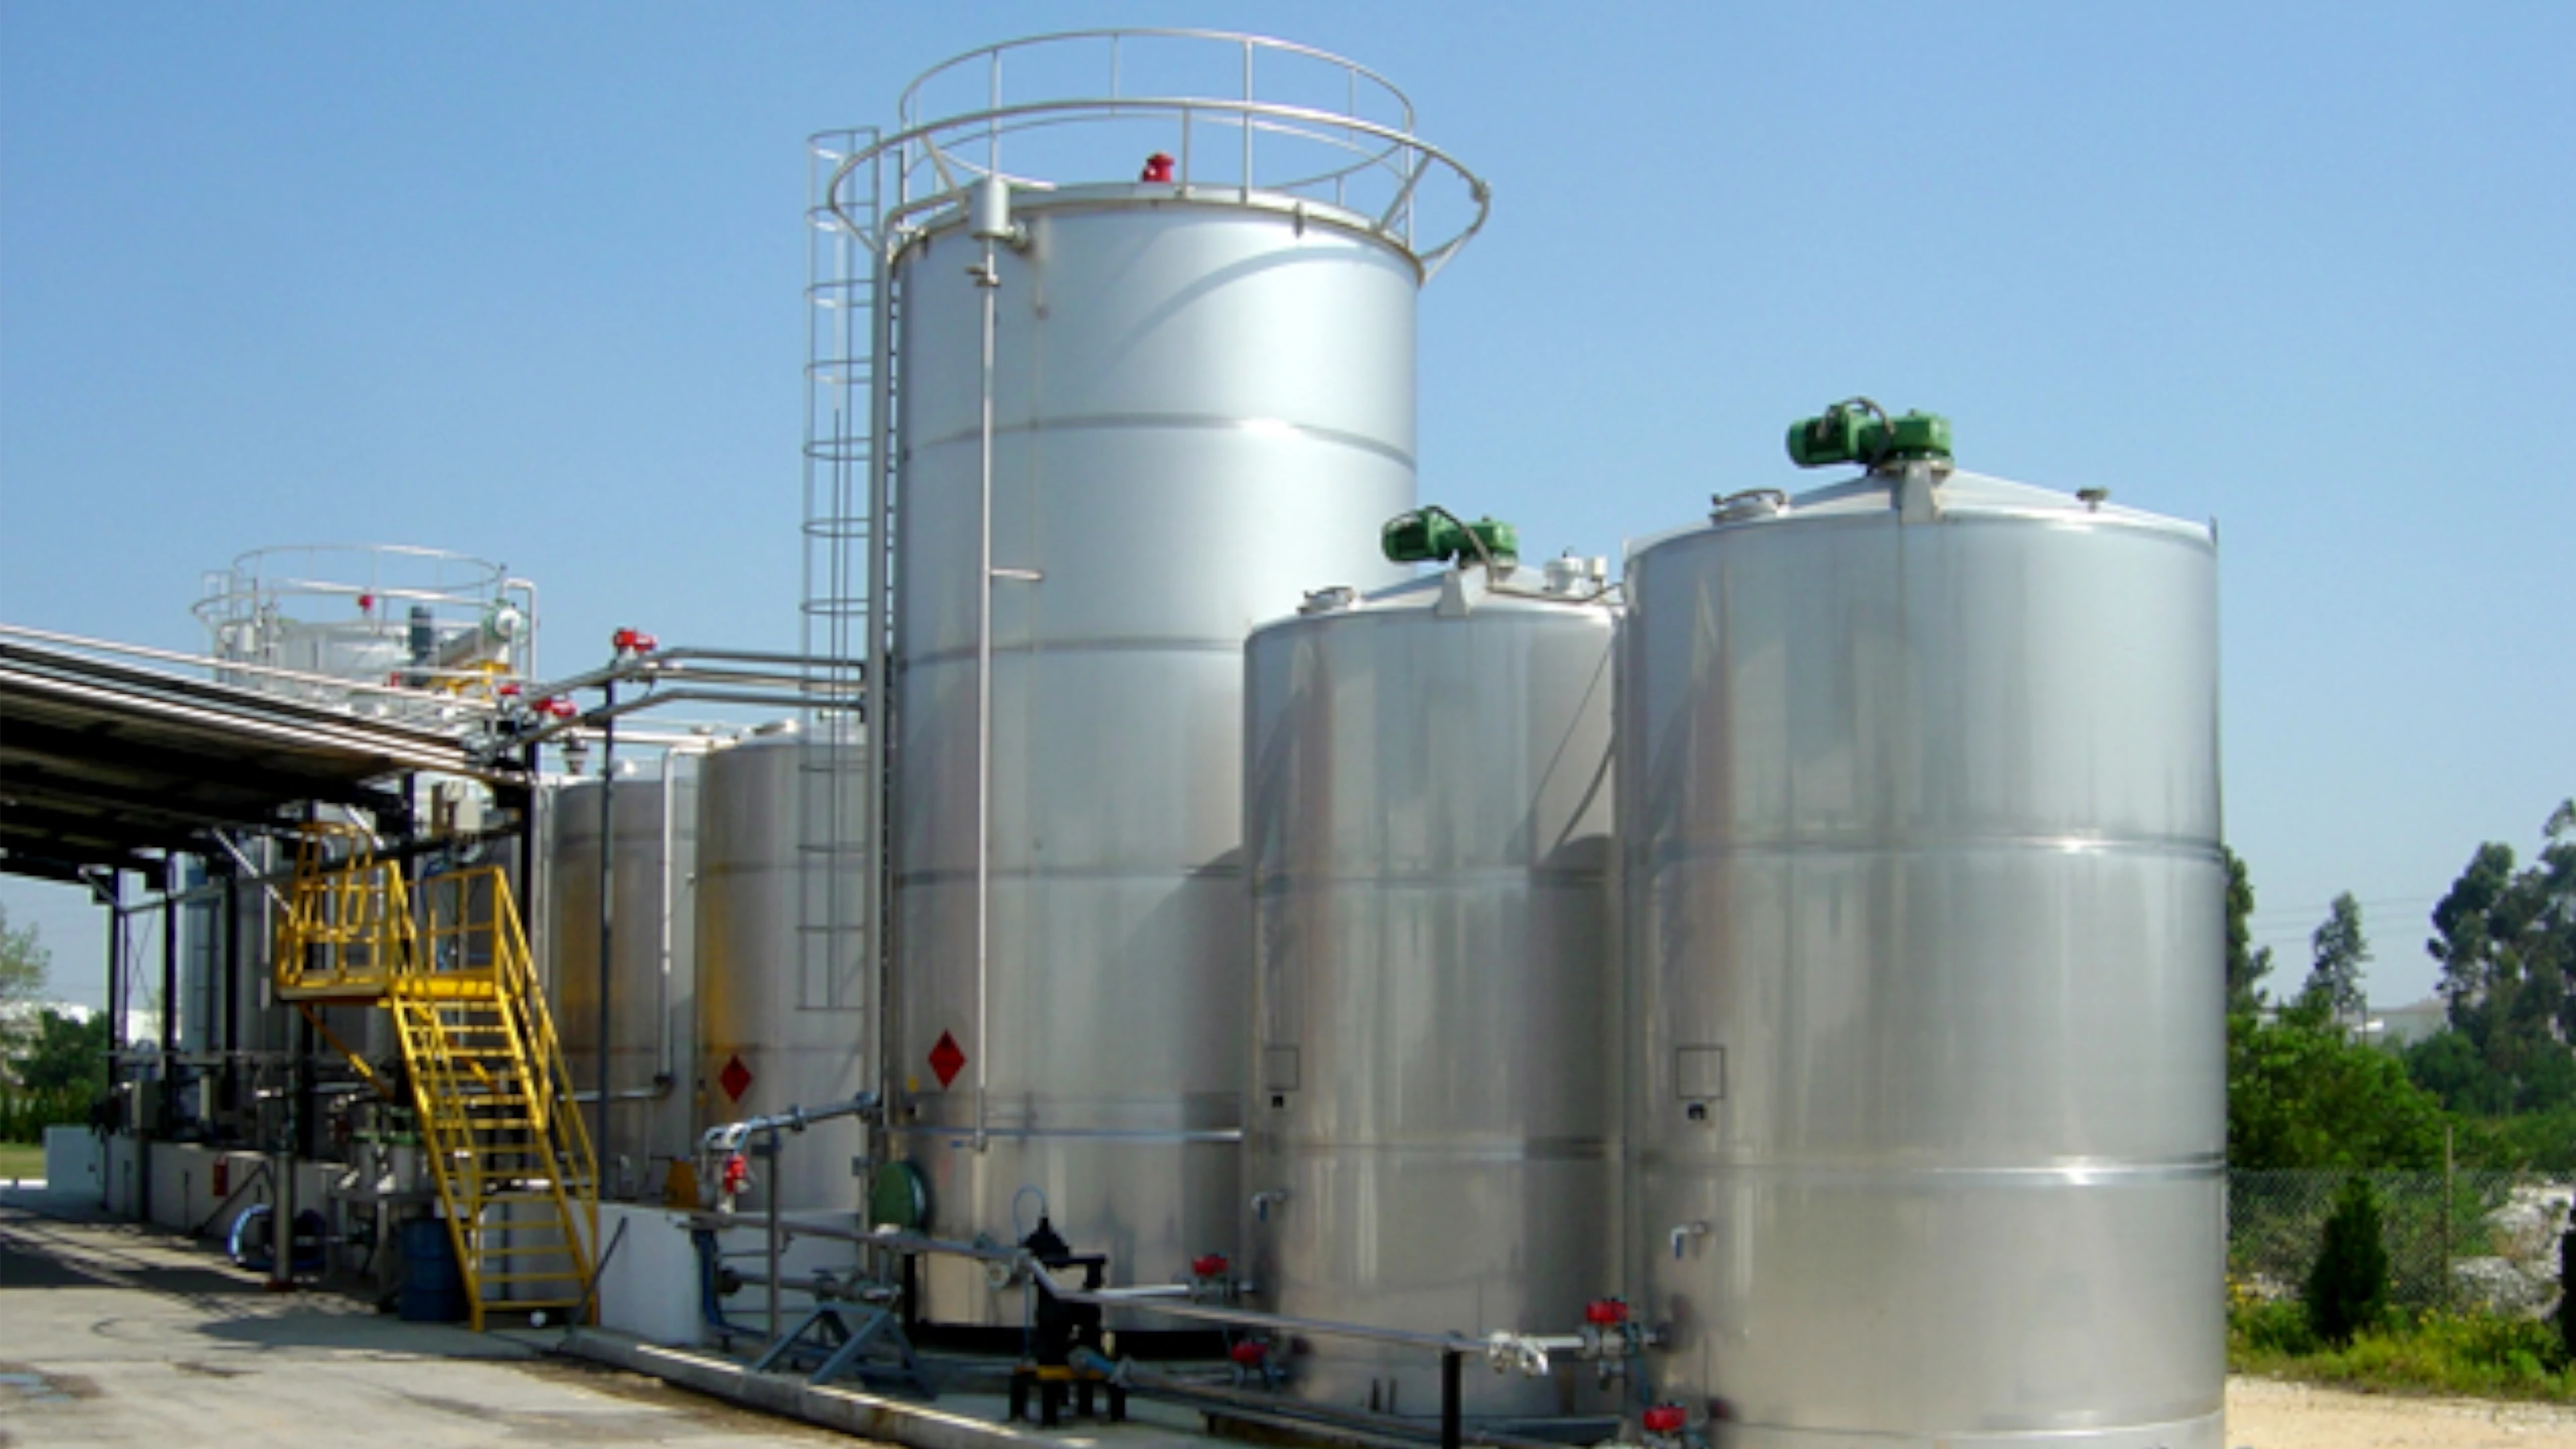 BTL Storage tanks in stainless steel - Chemical Industry – Chemical substances